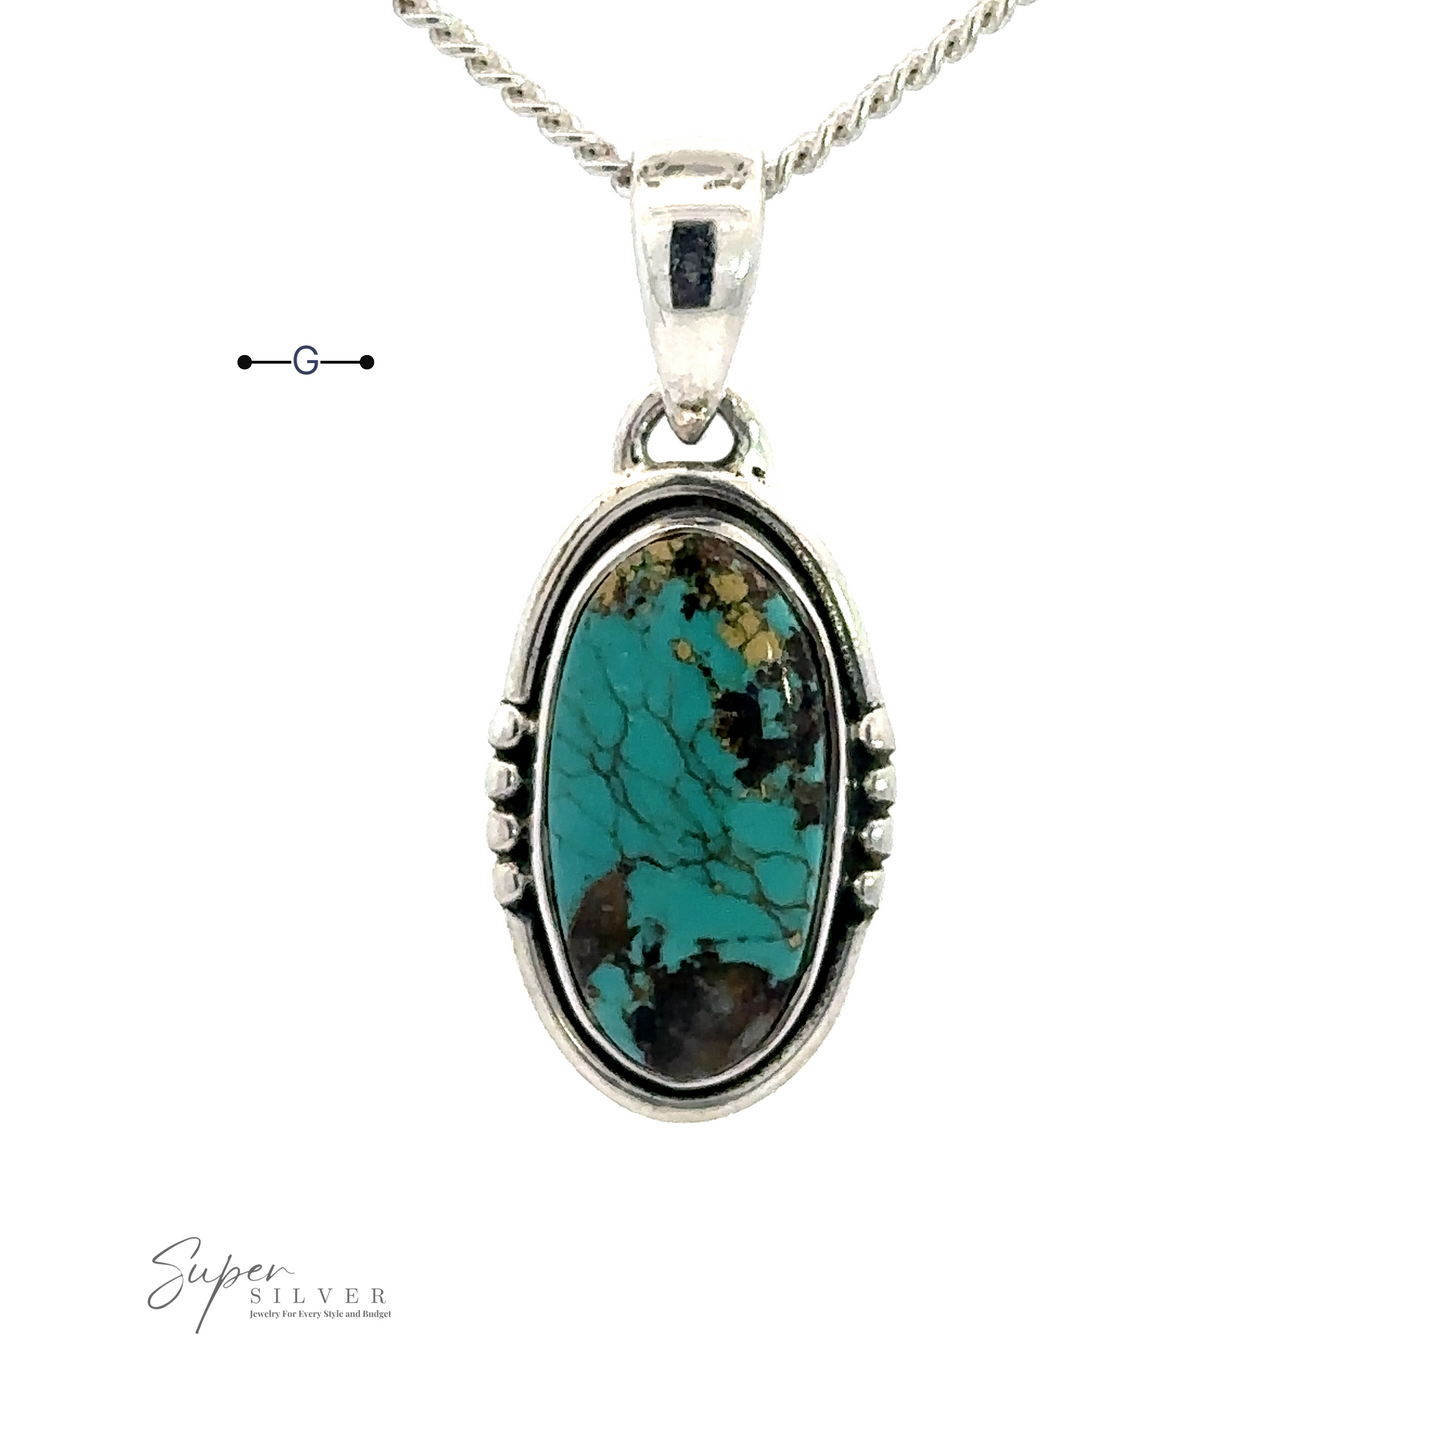 
                  
                    A handmade sterling silver necklace with a Natural Turquoise Elongated Oval Pendant featuring an oval stone with black and brown veining. The pendant has decorative elements surrounding the stone, and the brand logo "Super Silver" is visible.
                  
                